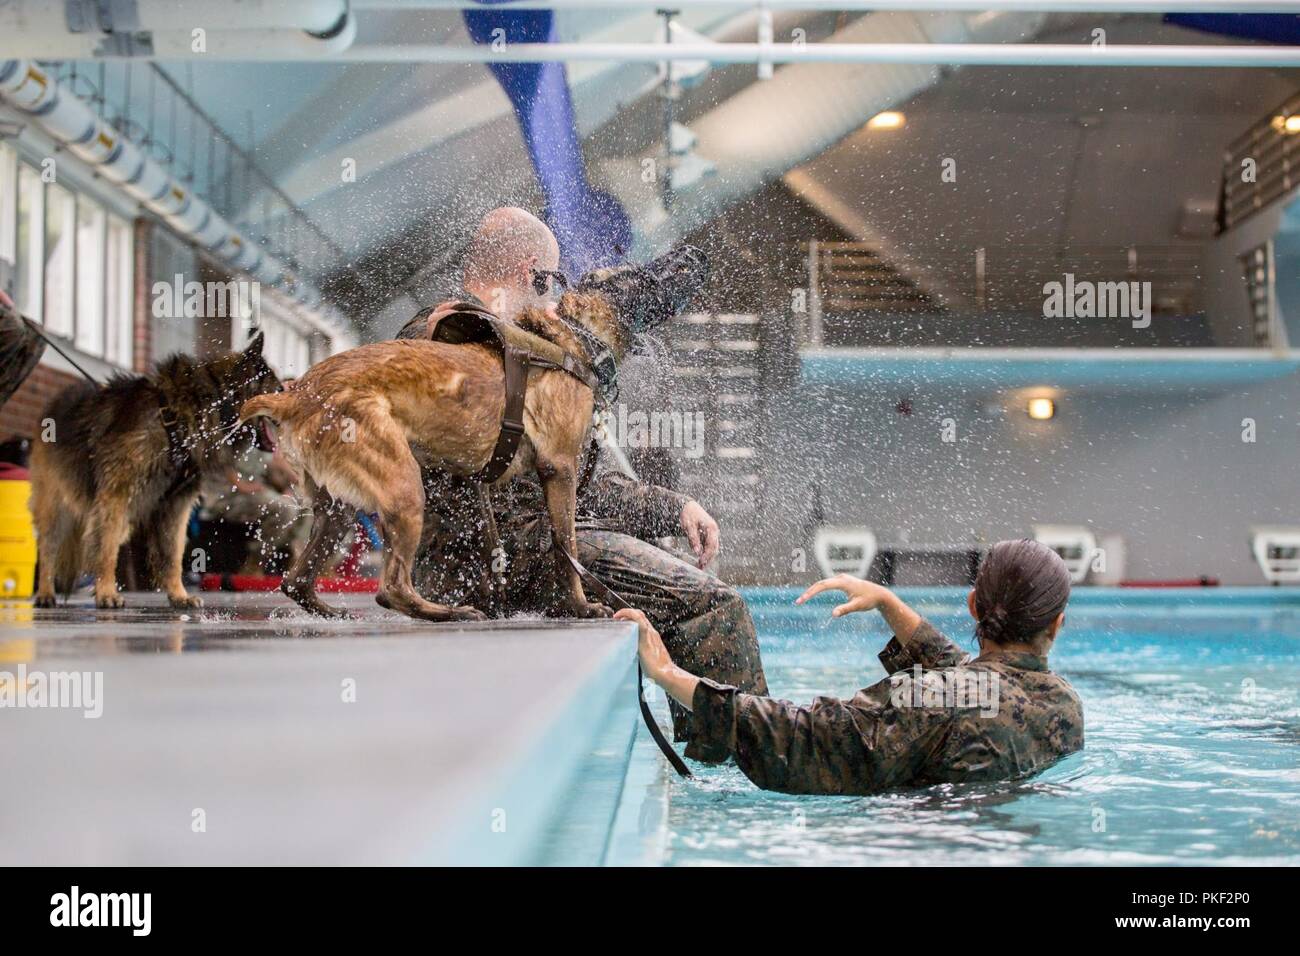 Lance Cpl. Victoria Acosta, a 2nd Law Enforcement Battalion military working dog-handler, is caught in her dog, Bella’s, surprise water shake after swimming in the Area 5 pool at Marine Corps Base Camp Lejeune, N.C., Aug. 3, 2018. 2nd LEB practiced aggression training as part of specialized training to familiarize their dogs with water. The 2nd LEB military working dogs benefit from this particular type of training due to not being exposed to water tactics during initial training periods and become better accustomed to performing duties in atypical situations. Stock Photo